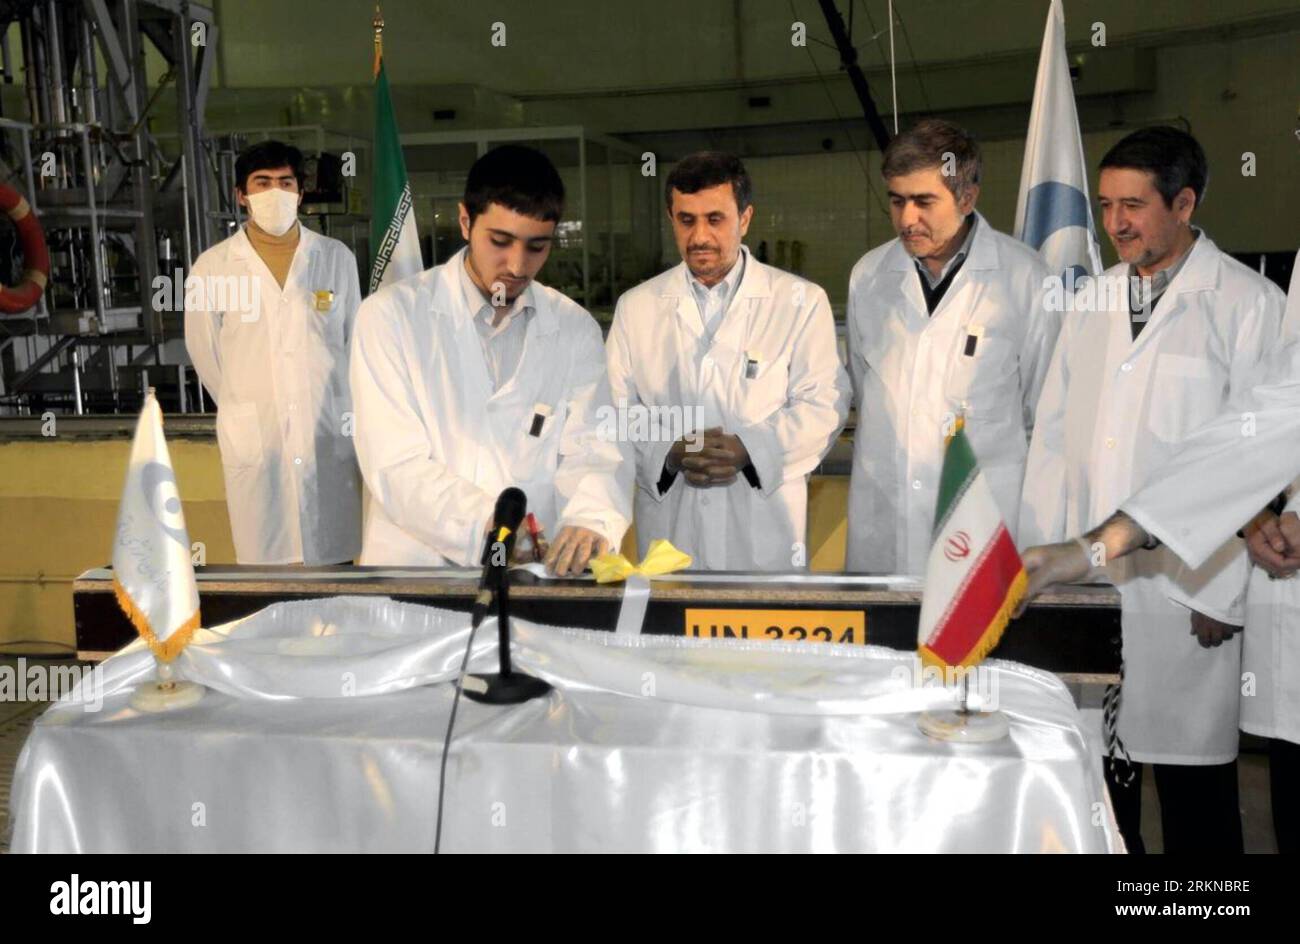 Bildnummer: 57076893  Datum: 15.02.2012  Copyright: imago/Xinhua (120215)-- TEHRAN, Feb. 15, 2012 (Xinhua) -- Iranian President Mahmoud Ahmadinejad (3rd, L) attends an unveiling ceremony of a new generation of centrifuge for uranium enrichment in Tehran, Iran, Feb. 15, 2012. In the ceremony, Ahmadinejad, symbolically, fed a home-made fuel rod made out of 20-percent enriched uranium into the core of Tehran Research Reactor. (Xinhua/Official Website of the Iranian President) IRAN-TEHRAN-NUCLEAR-AHMADINEJAD PUBLICATIONxNOTxINxCHN People Politik AKW Zentrifuge Nukleartechnik Atomprogramm Atomstrei Stock Photo